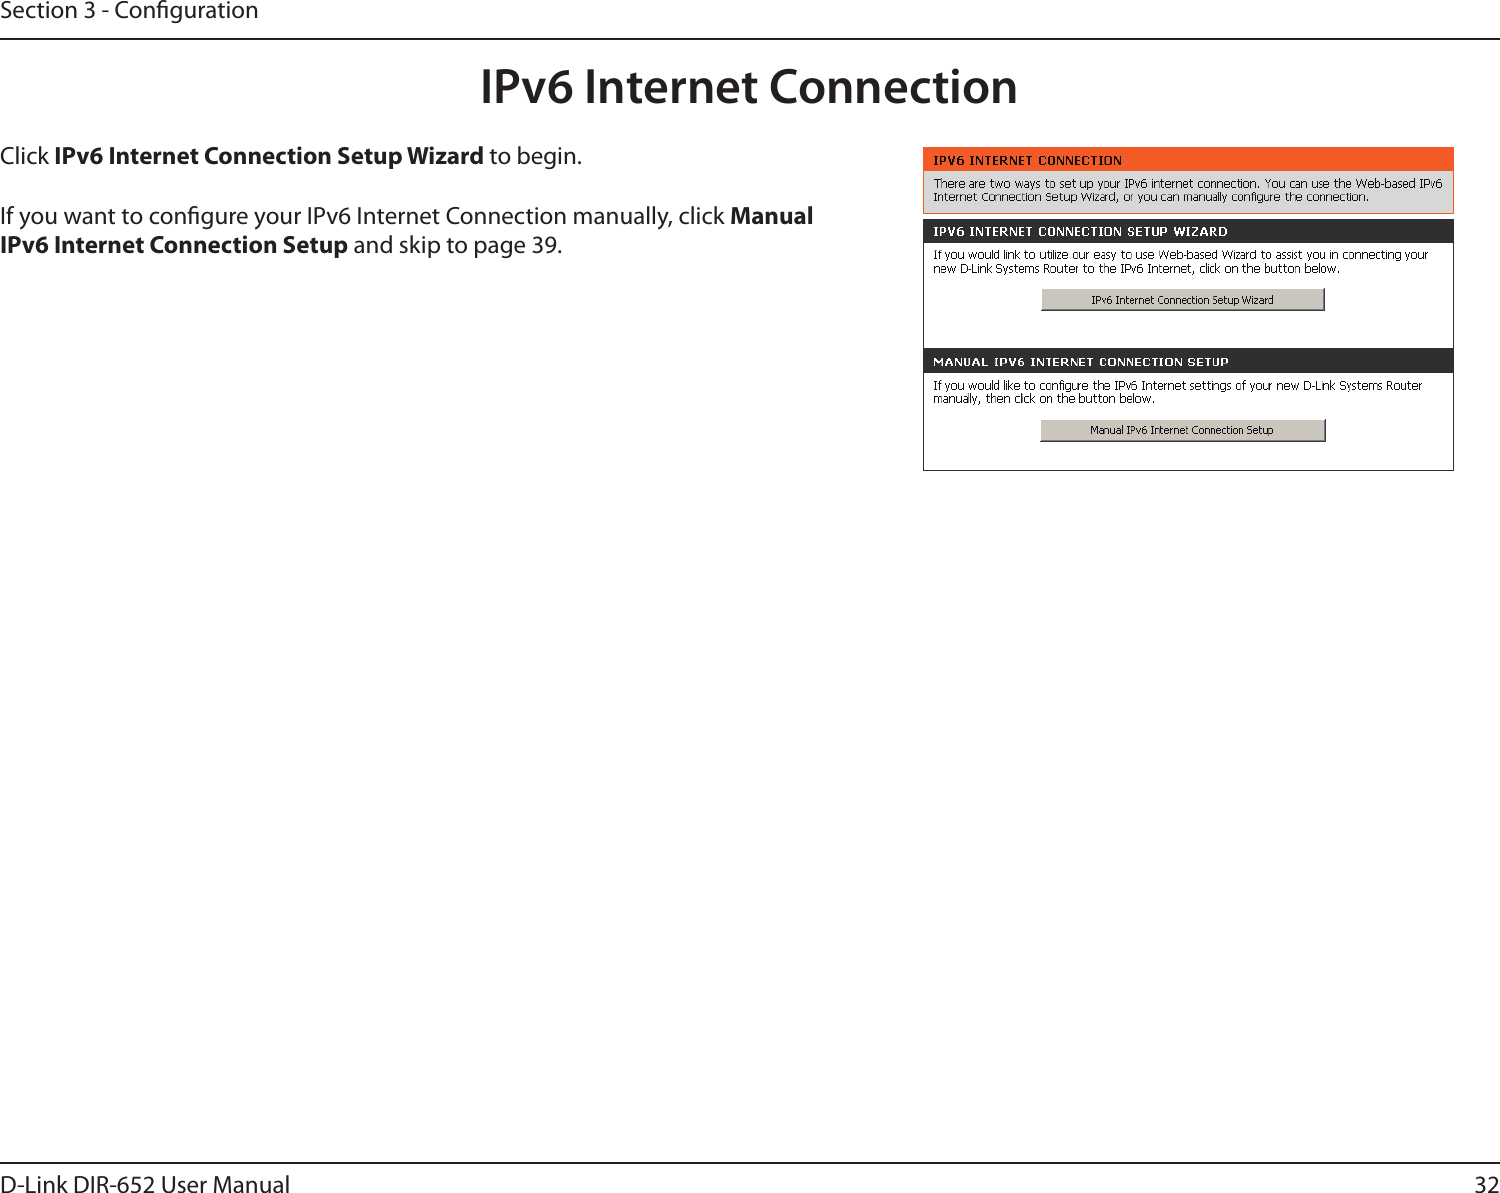 32D-Link DIR-652 User ManualSection 3 - CongurationIPv6 Internet ConnectionClick IPv6 Internet Connection Setup Wizard to begin.If you want to congure your IPv6 Internet Connection manually, click Manual IPv6 Internet Connection Setup and skip to page 39.